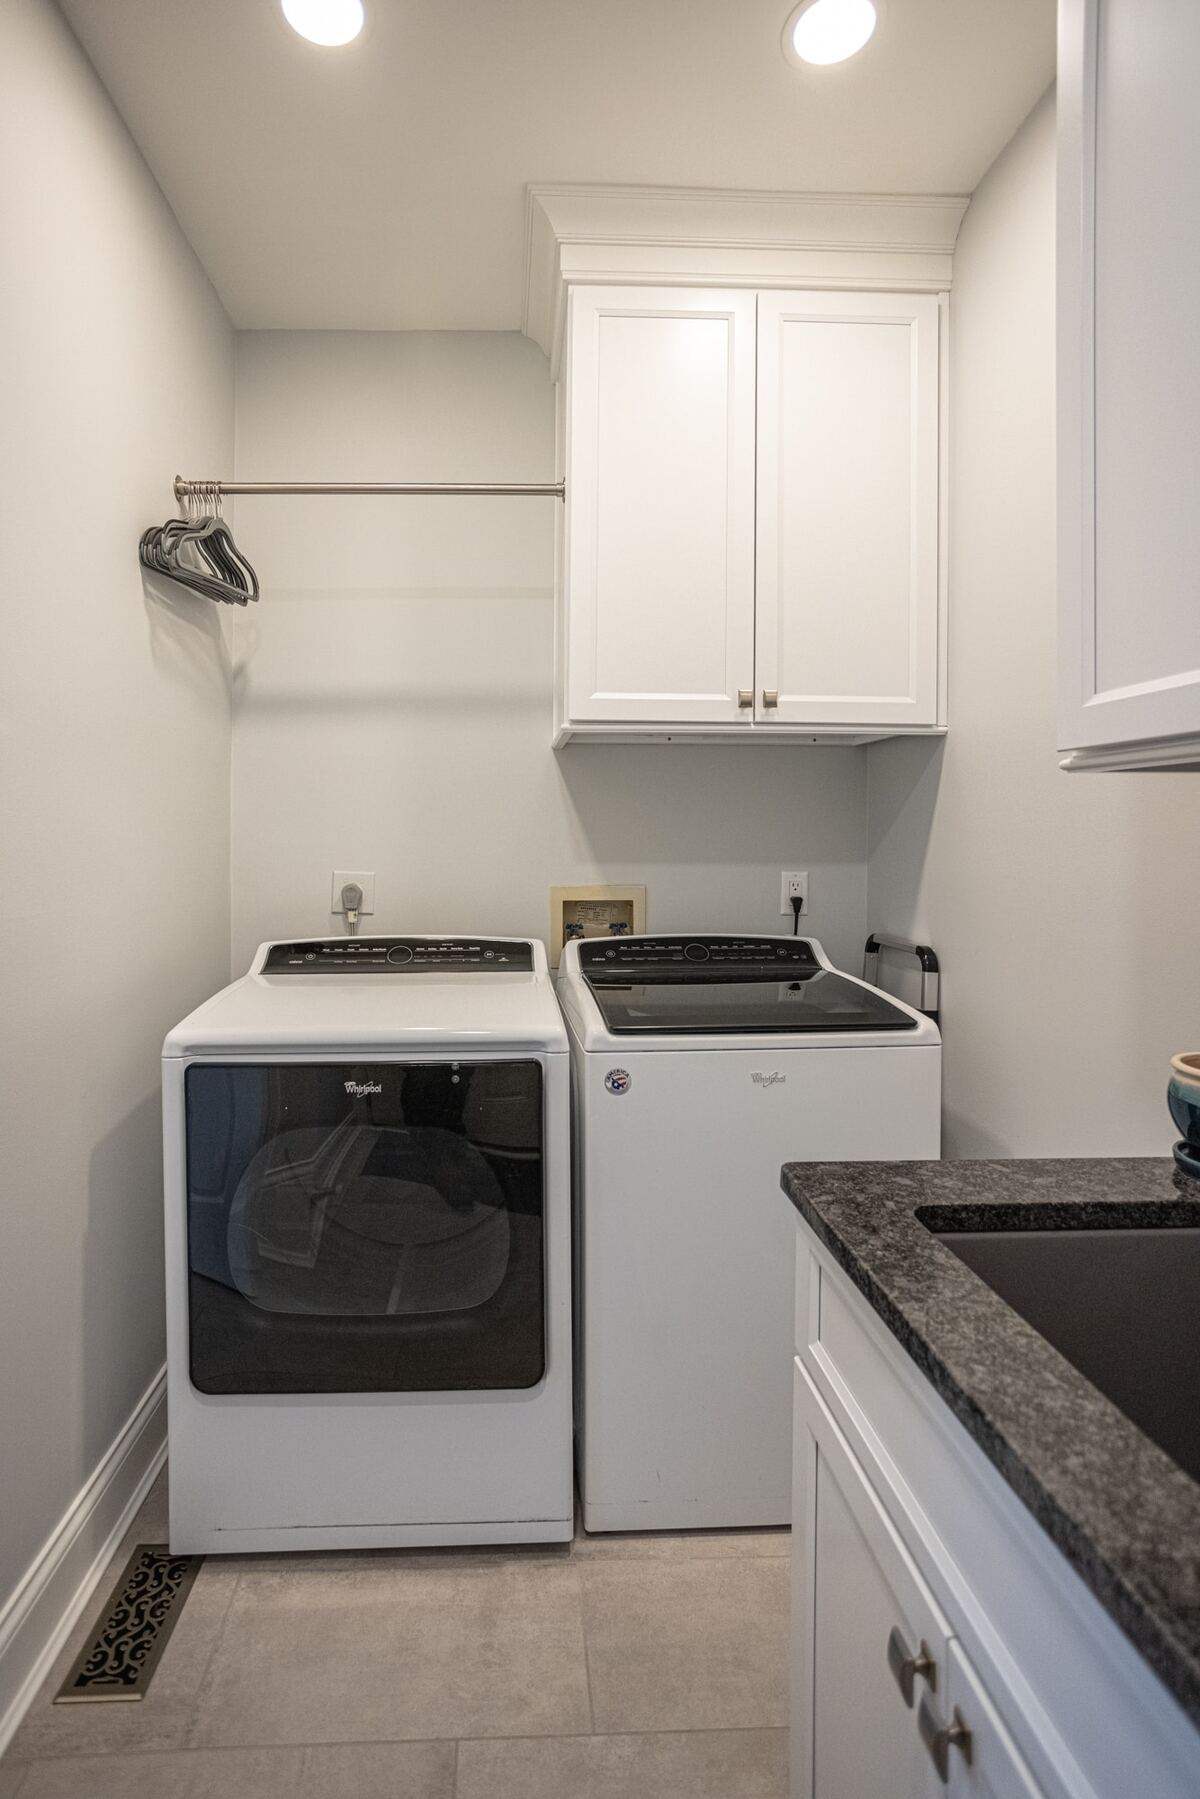 Laundry room remodel with custom white shaker cabinets and sink